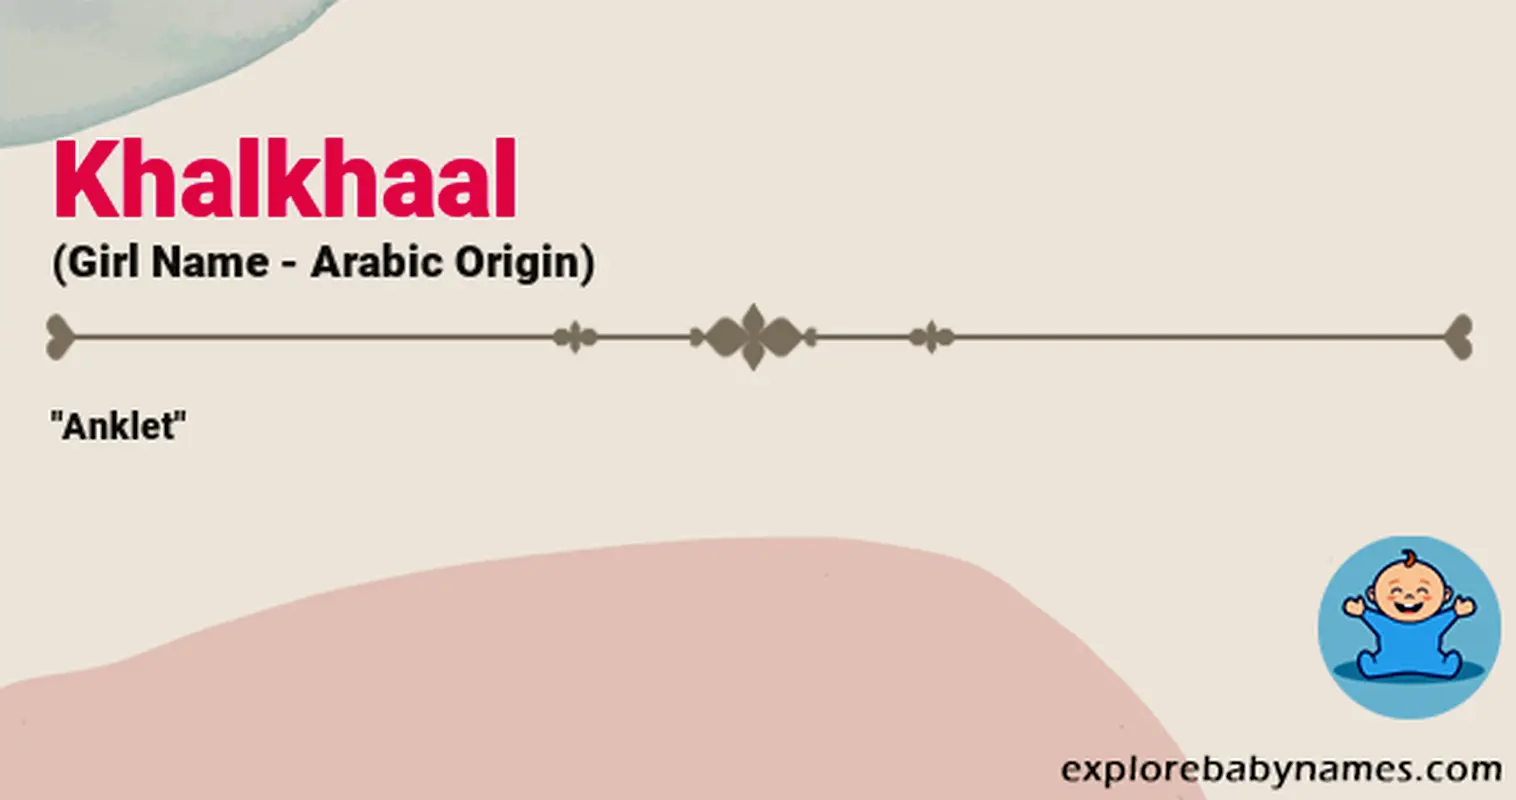 Meaning of Khalkhaal